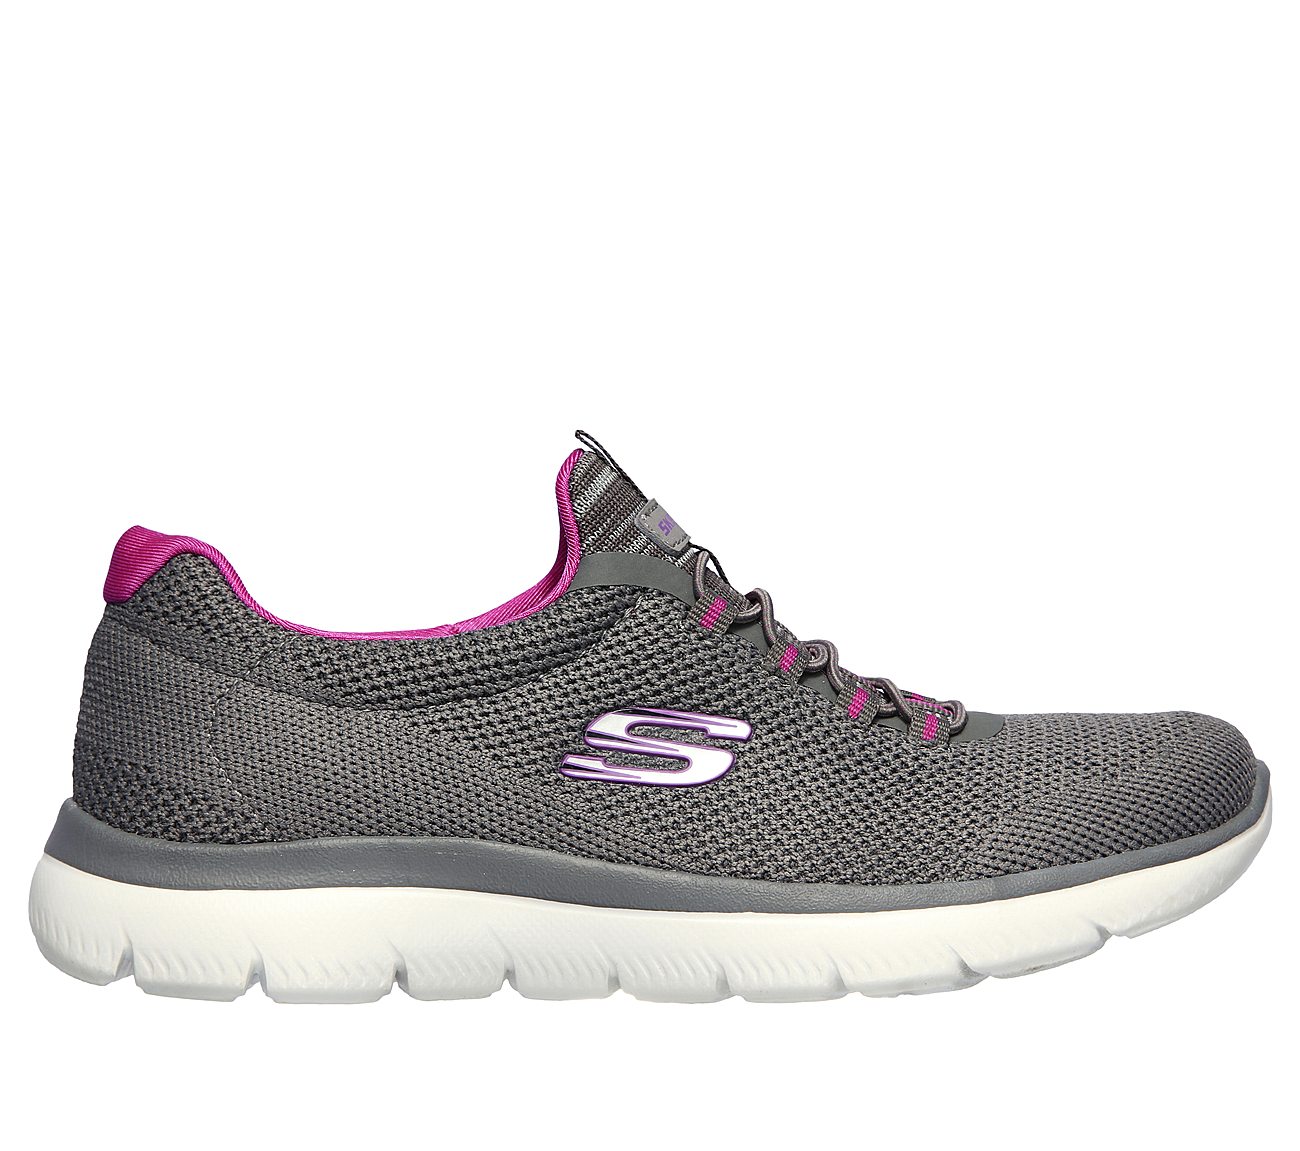 cool skechers shoes